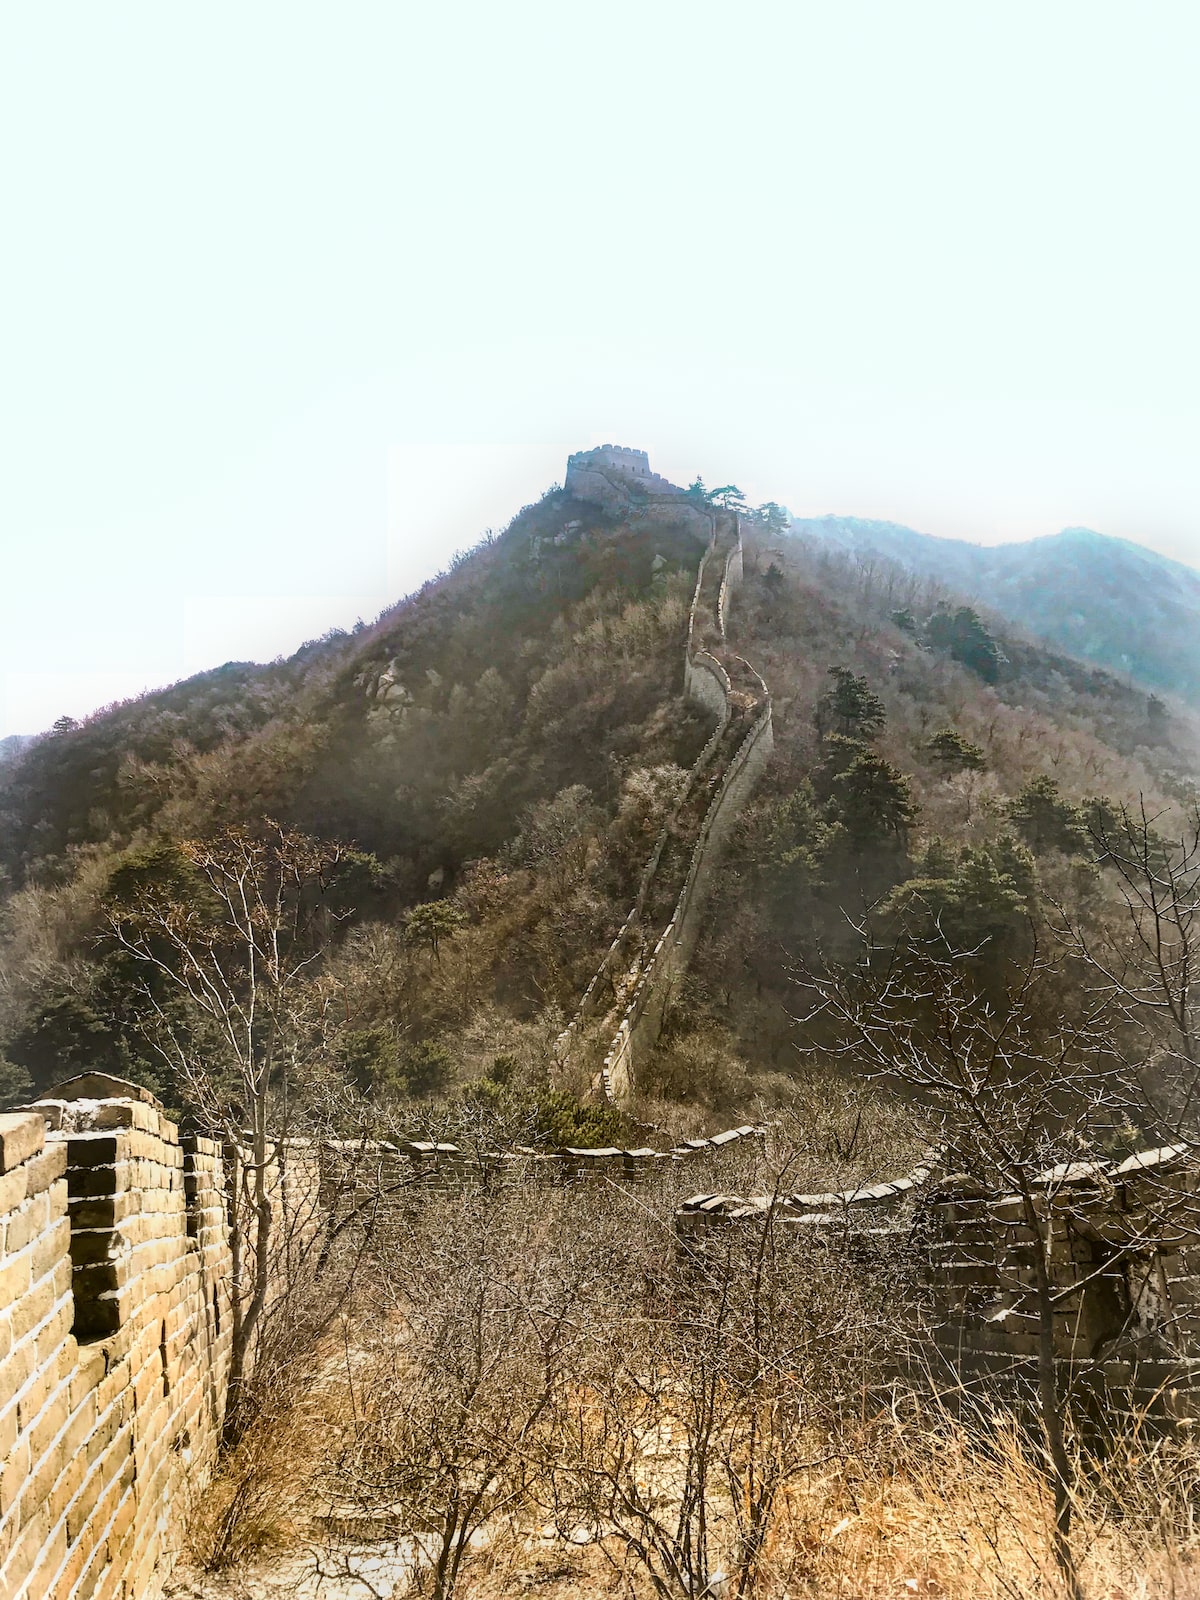 A steep large bridged wall with overgrown trees and fauna at The Great Wall of China.